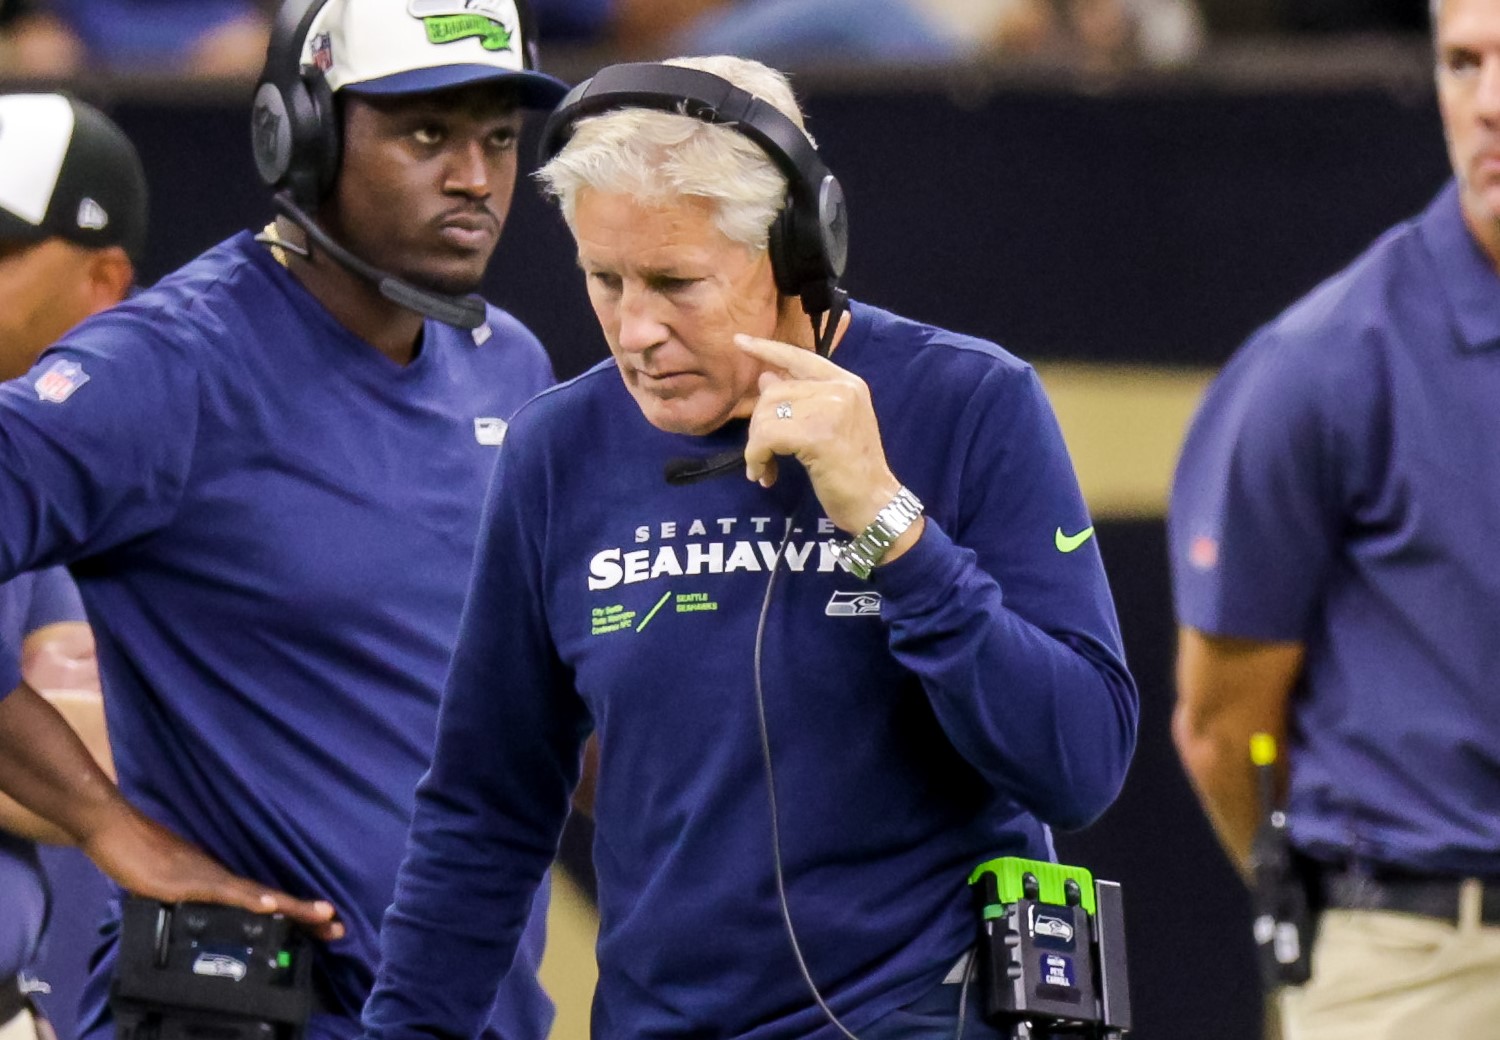 With Seahawks’ Defense Setting Historic Marks For Wrong Reasons – Again – Buck Stops With Pete Carroll